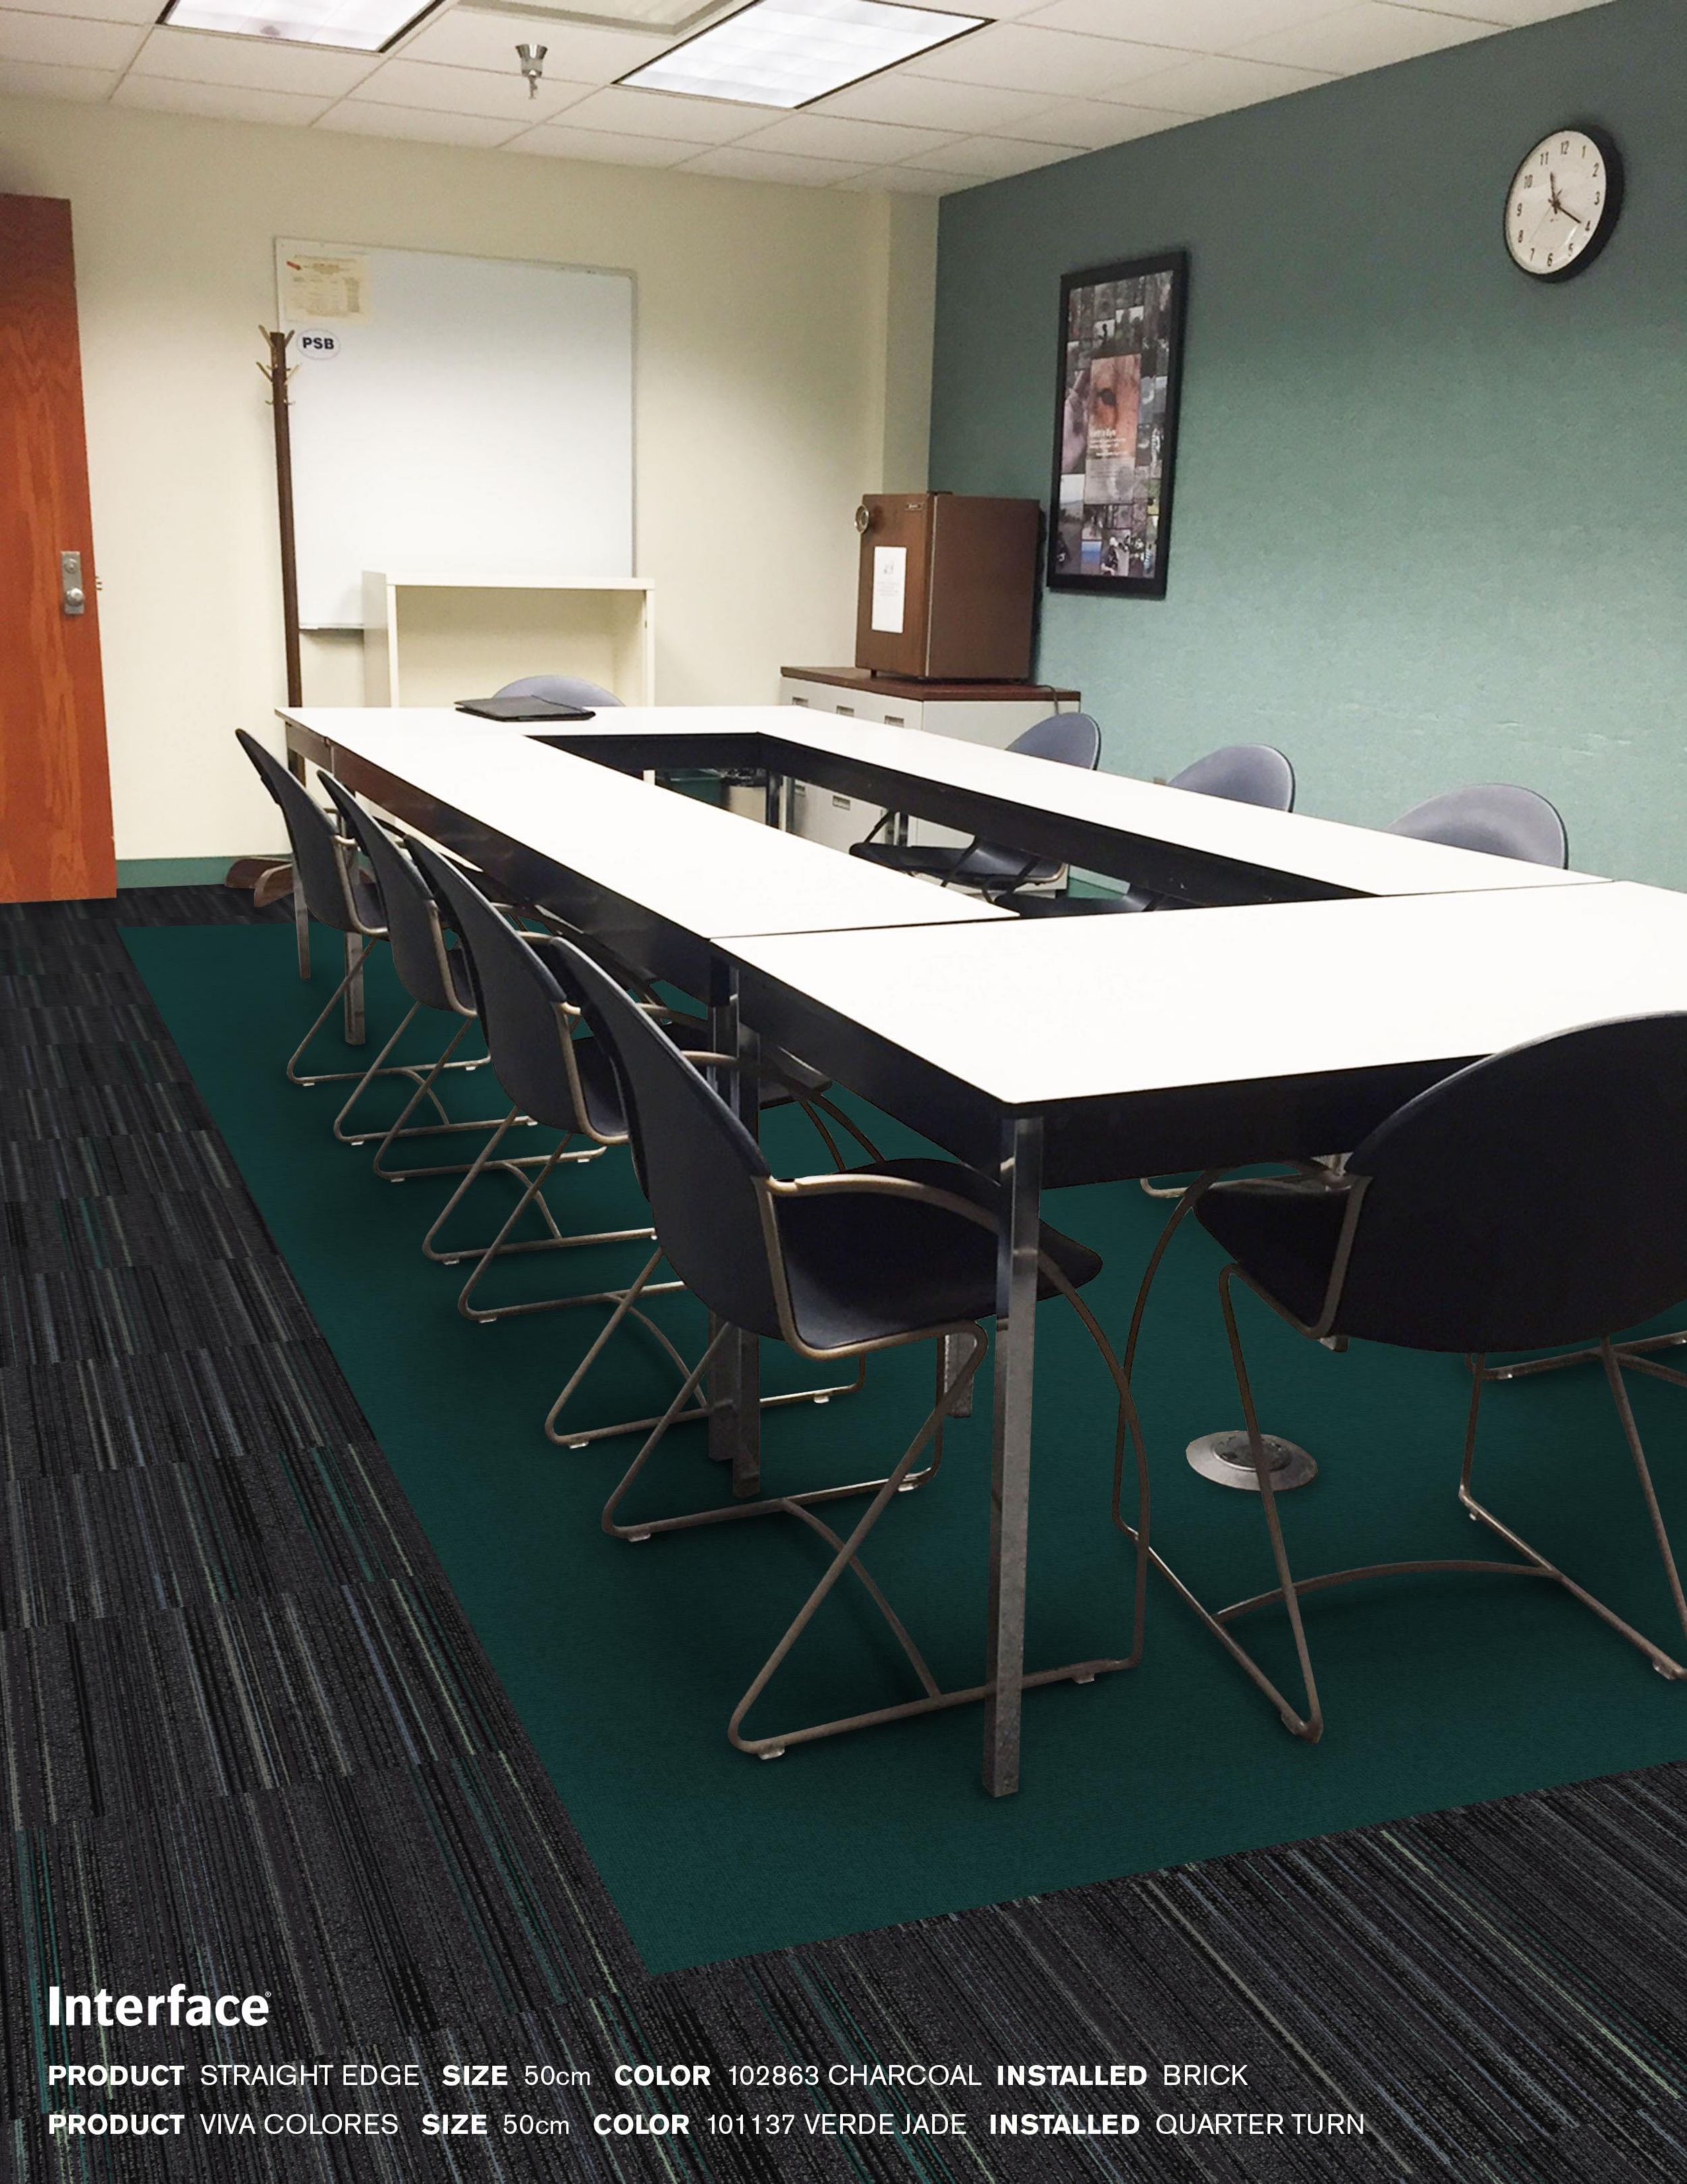 Interface Straight Edge and Viva Colores carpet tile in meeting room with rectangular conerence table and chairs imagen número 2